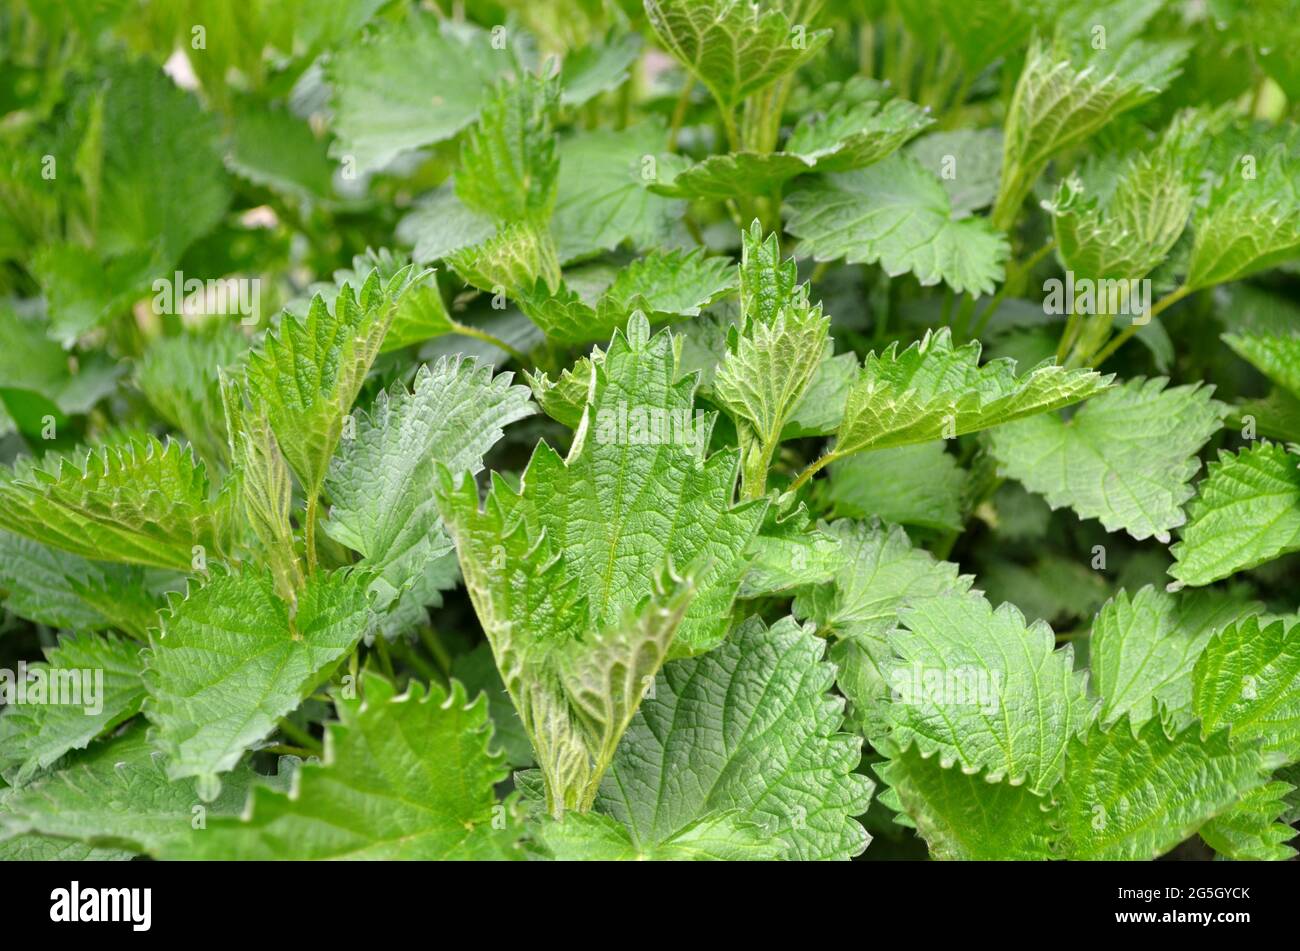 Stinging nettle or Urtica dioica - herbaceous perennial medicinal plant in the family Urticaceae, selective focus. Stock Photo